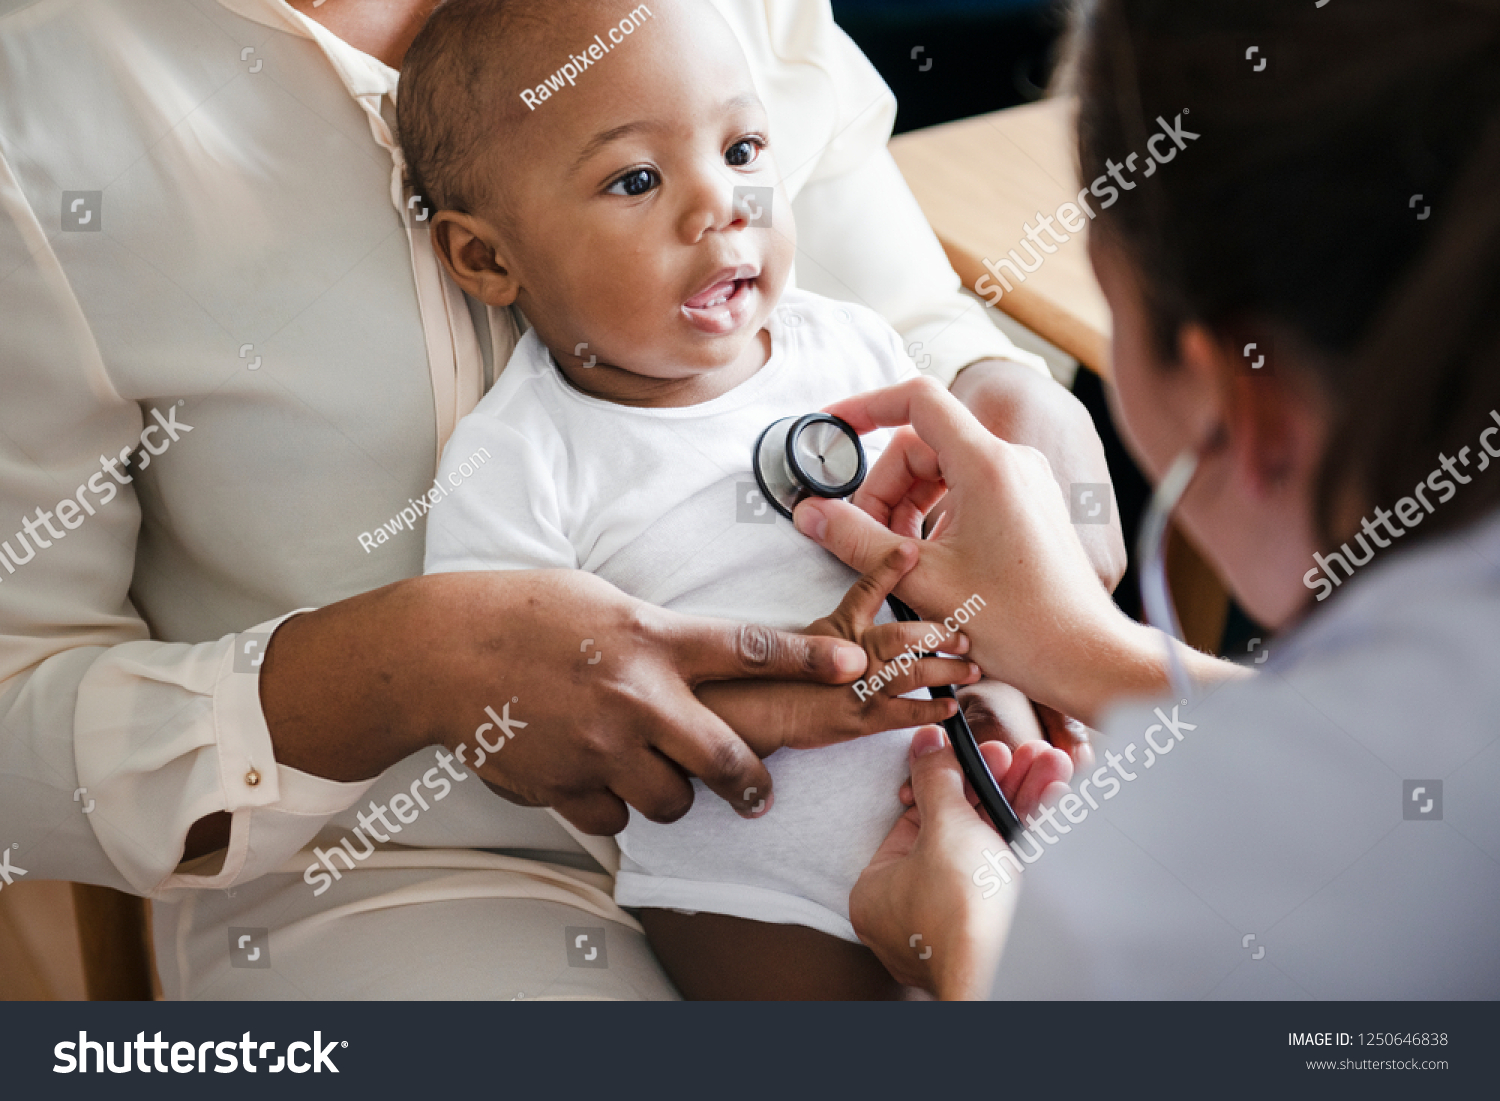 baby visit doctor